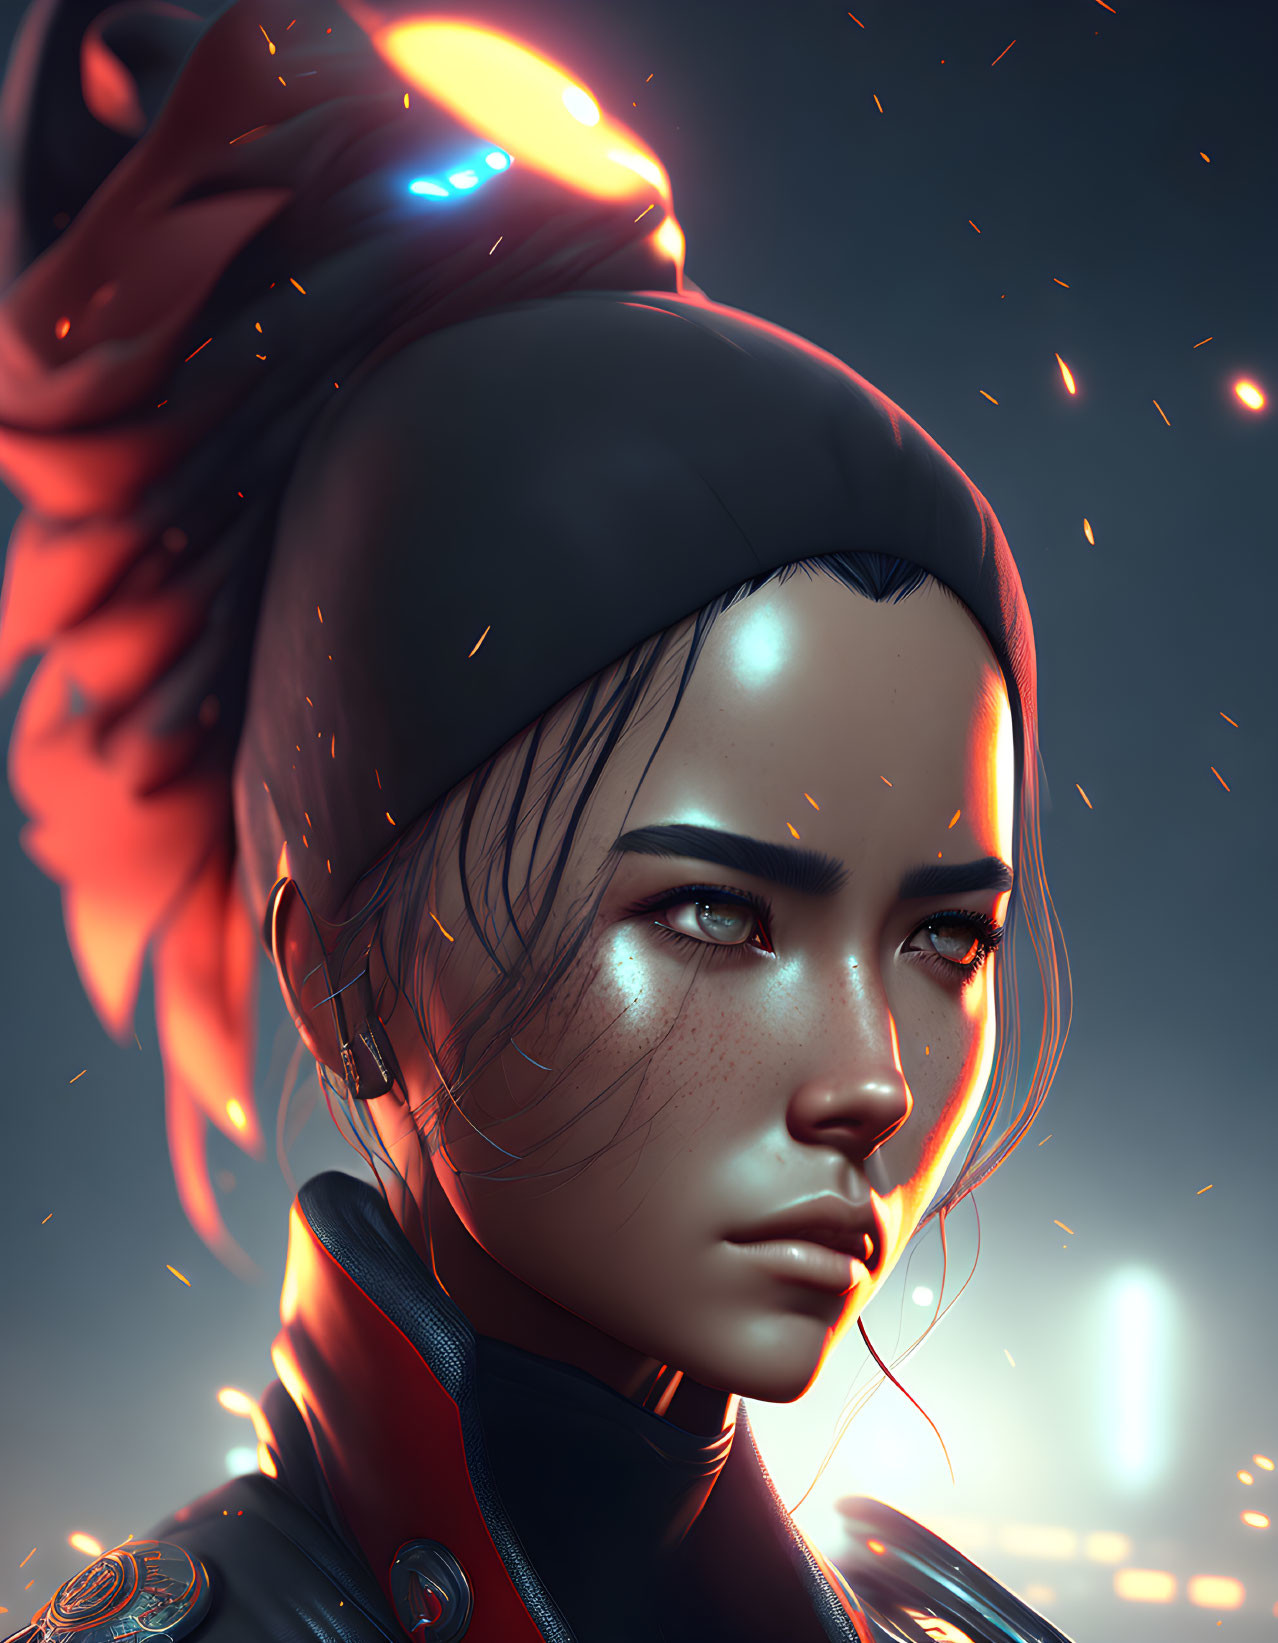 Digital portrait of woman in sci-fi military attire with blue headset on dark, spark-filled backdrop